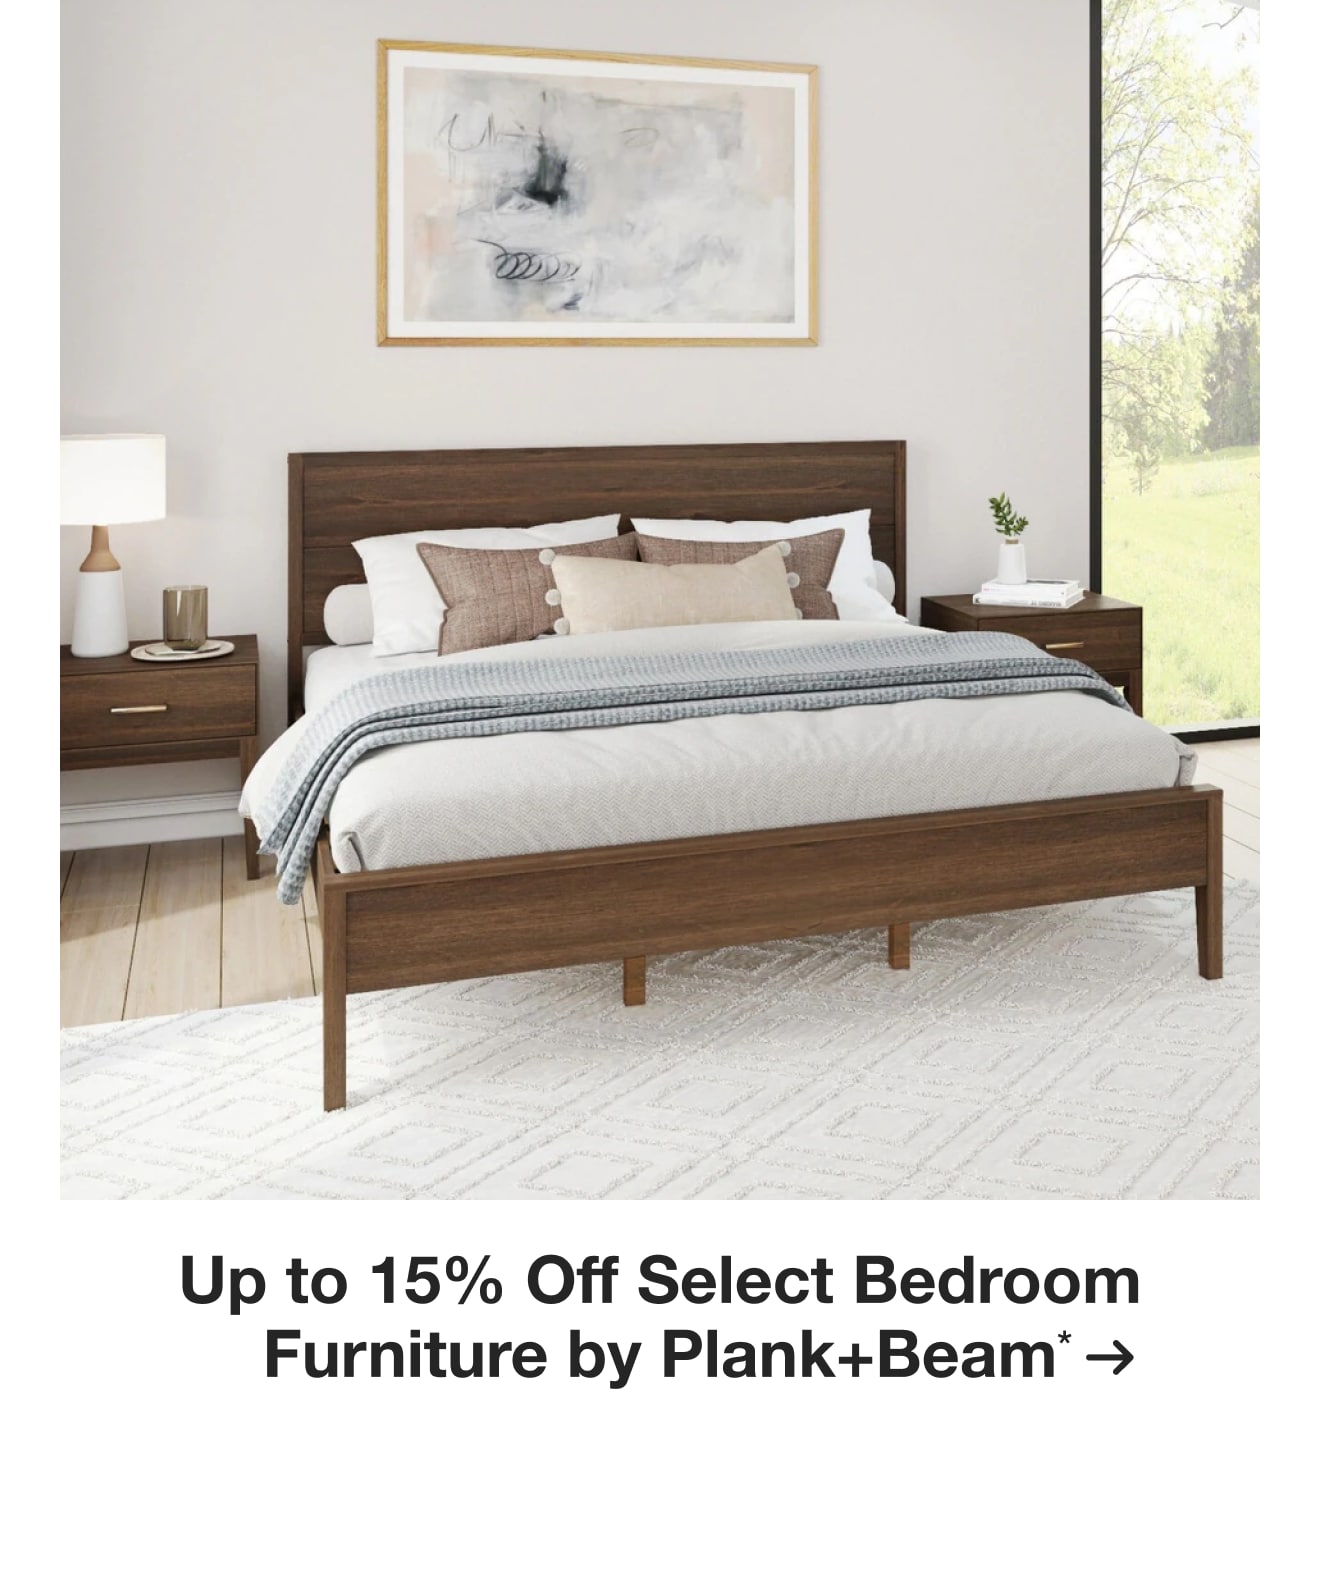 Up to 15% Off Select Bedroom Furniture by Plank+Beam*